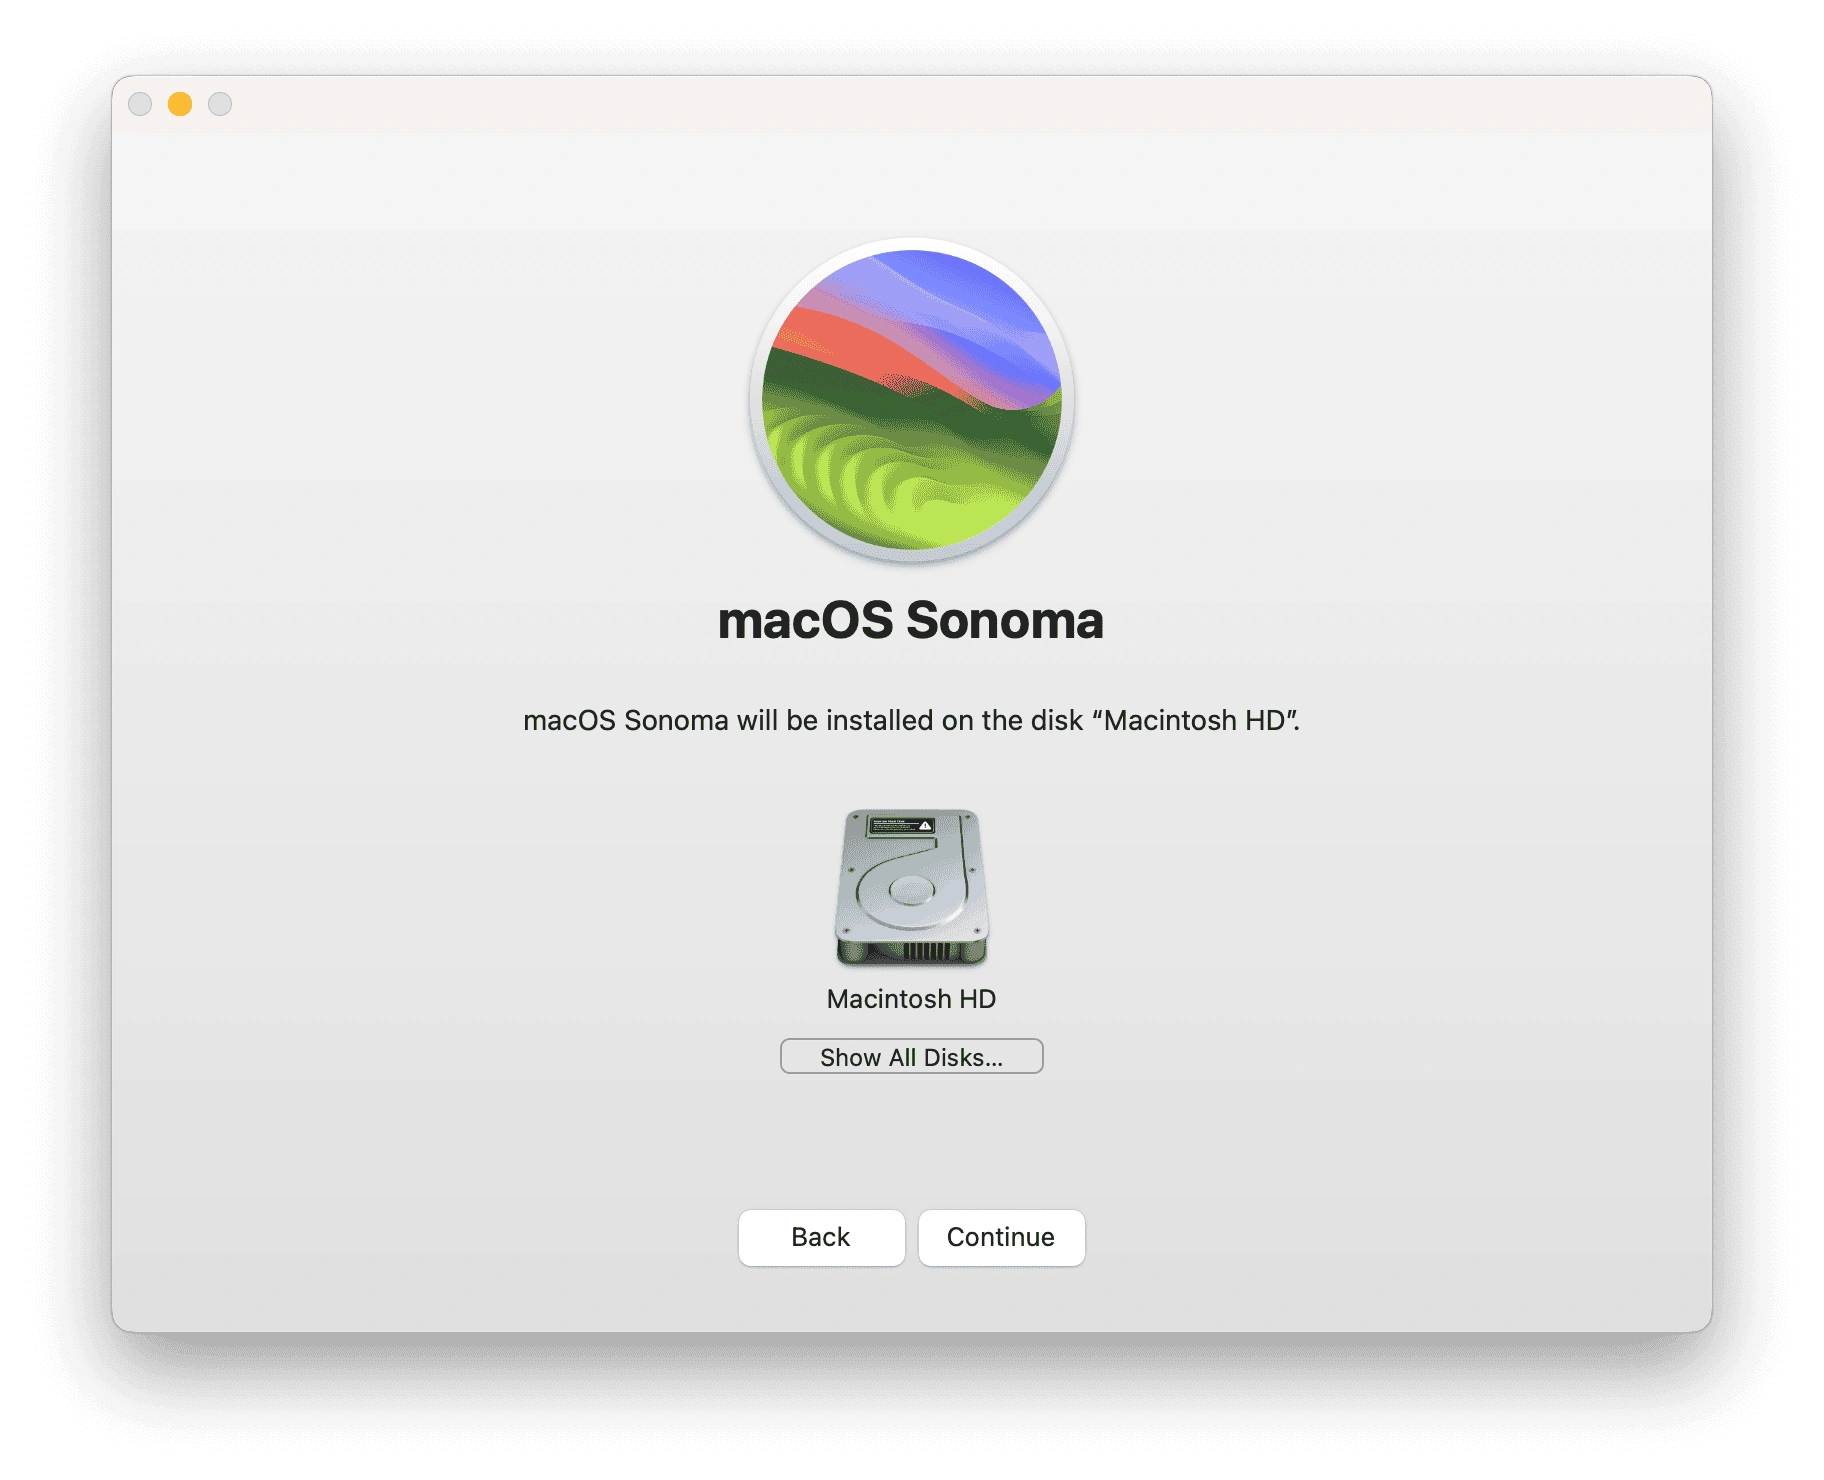 Selet Disk to Install macOS Sonoma